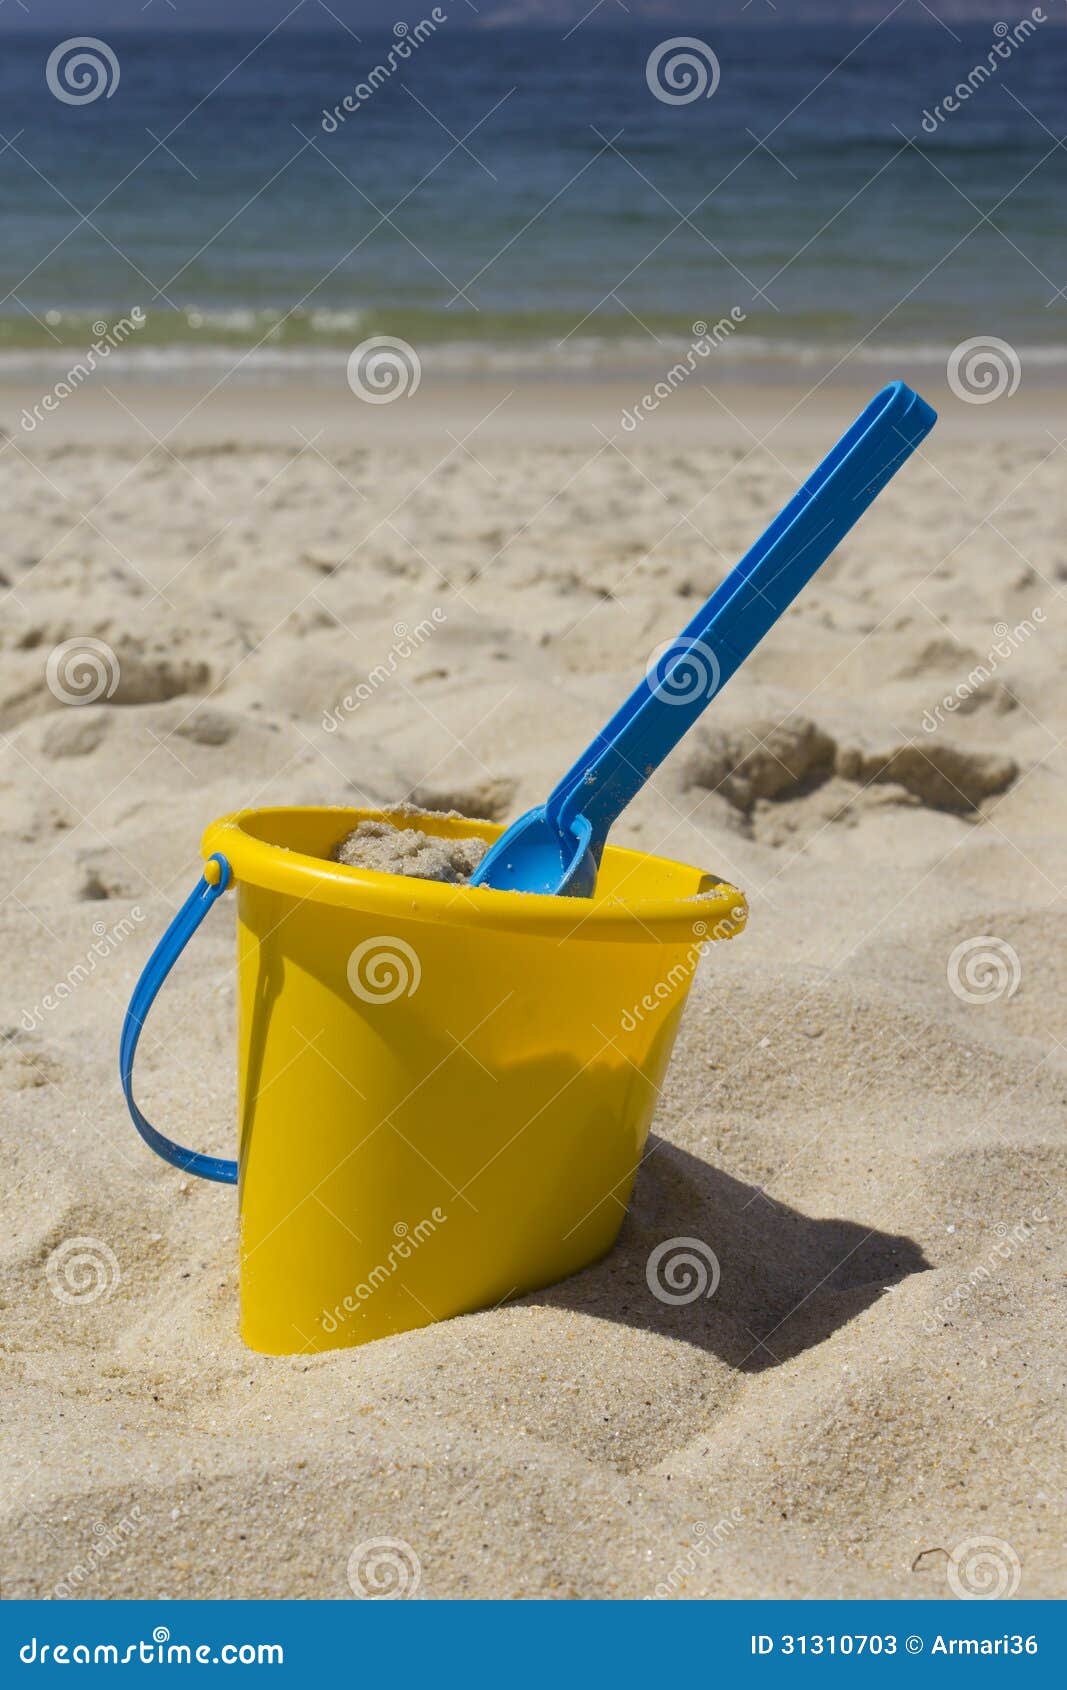 Picture of a bucket with his shovel in the sand at the beach.